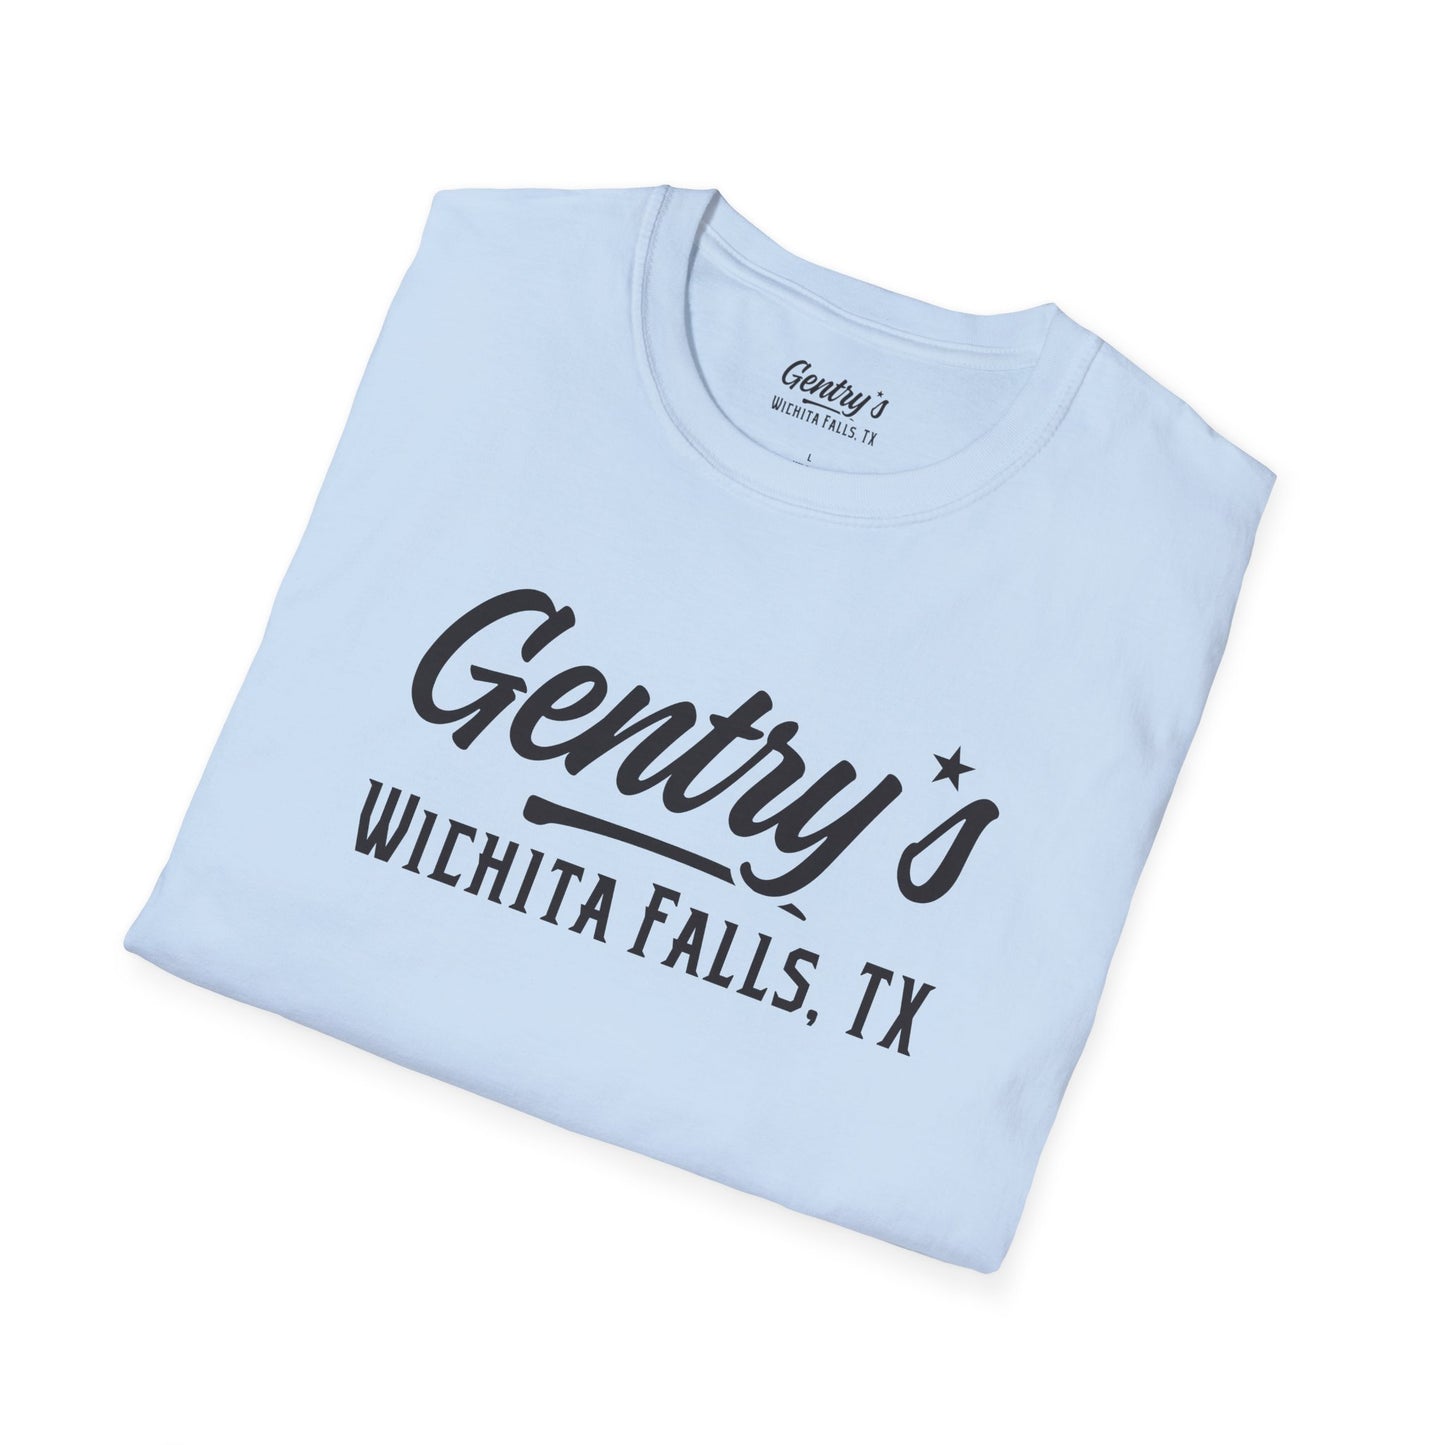 Gentry's Unisex Softstyle T-Shirt